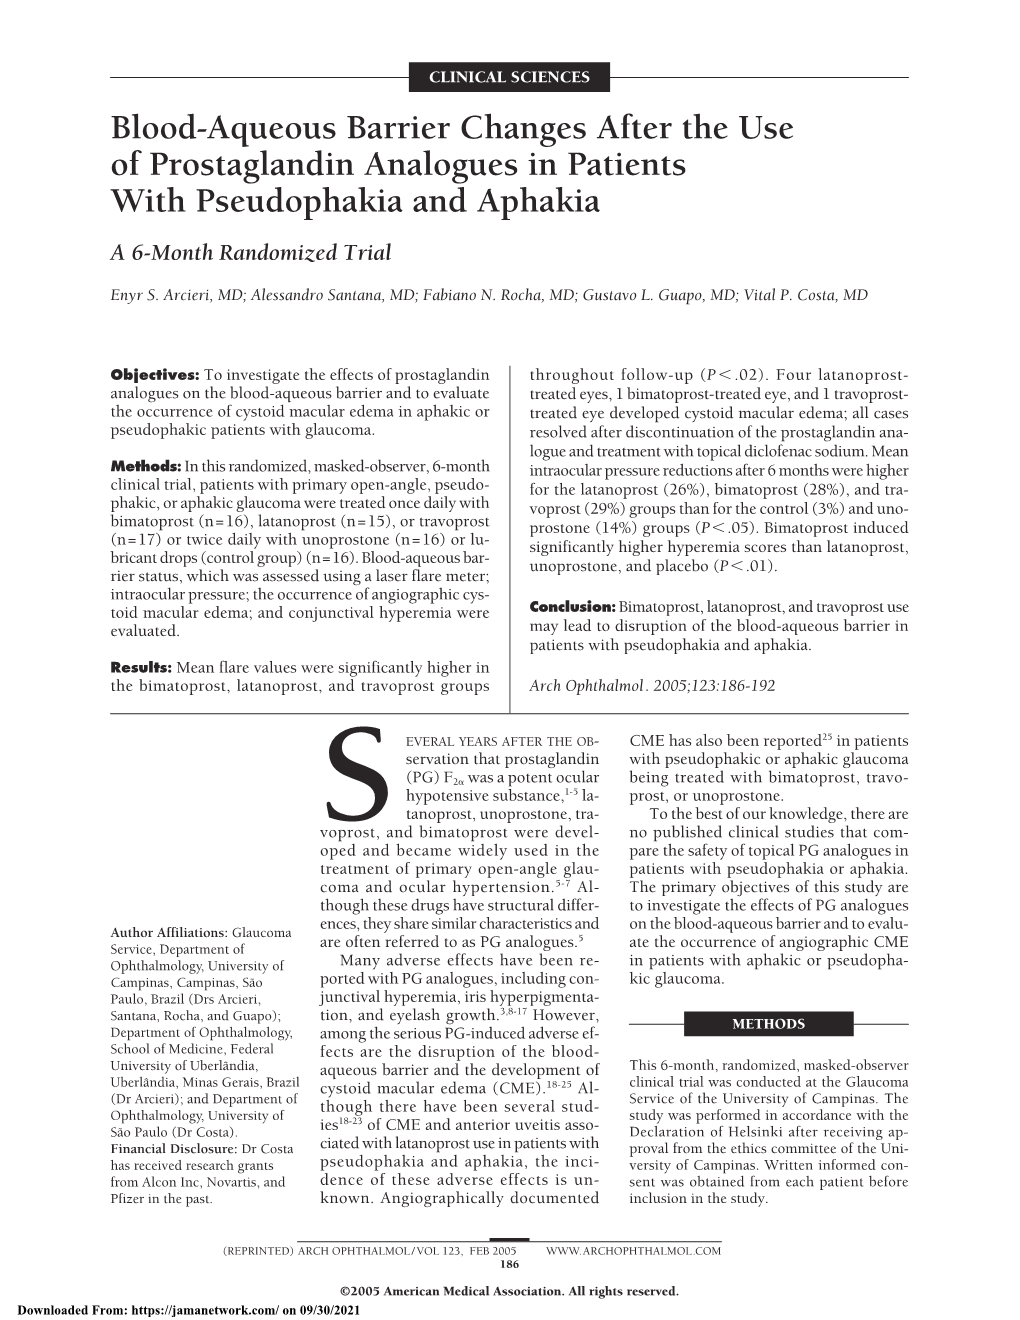 Blood-Aqueous Barrier Changes After the Use of Prostaglandin Analogues in Patients with Pseudophakia and Aphakia a 6-Month Randomized Trial